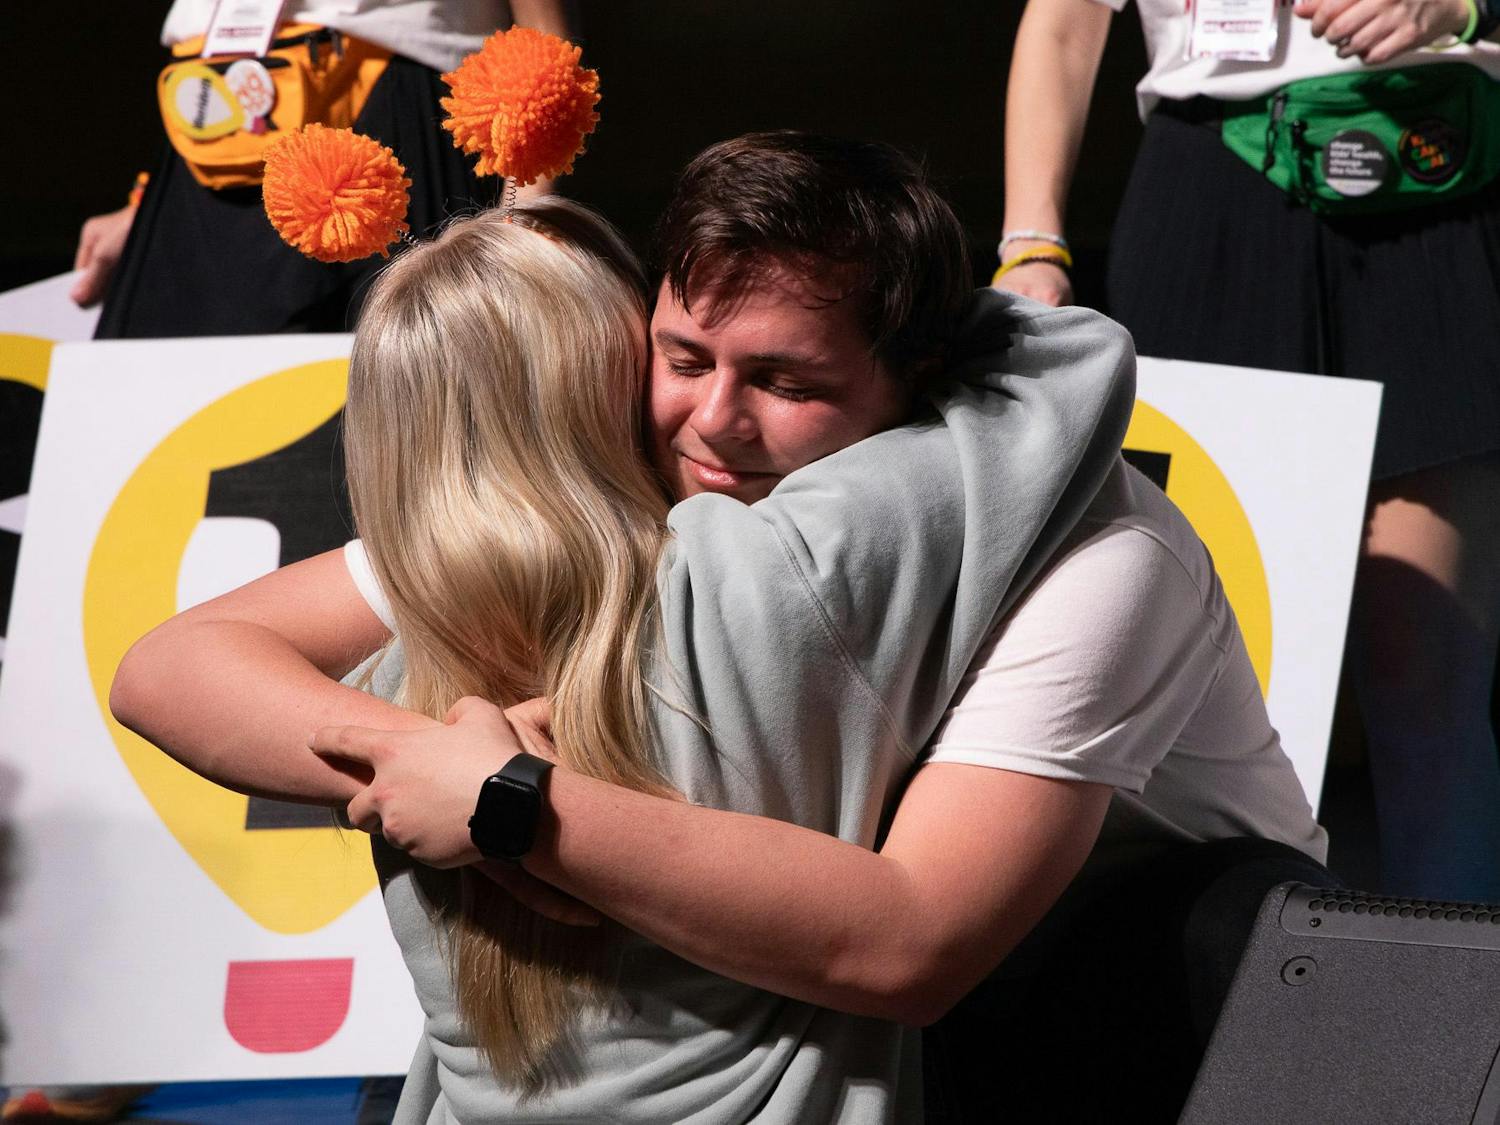 The Dance Marathon main event took place on Saturday, Feb. 24, 2024, at Strom Thurmond Wellness and Fitness Center. Two students happily hug after the reveal of the total funds raised for Prisma Health Children's Hospital - Midlands, USC Dance Marathon's partner hospital.